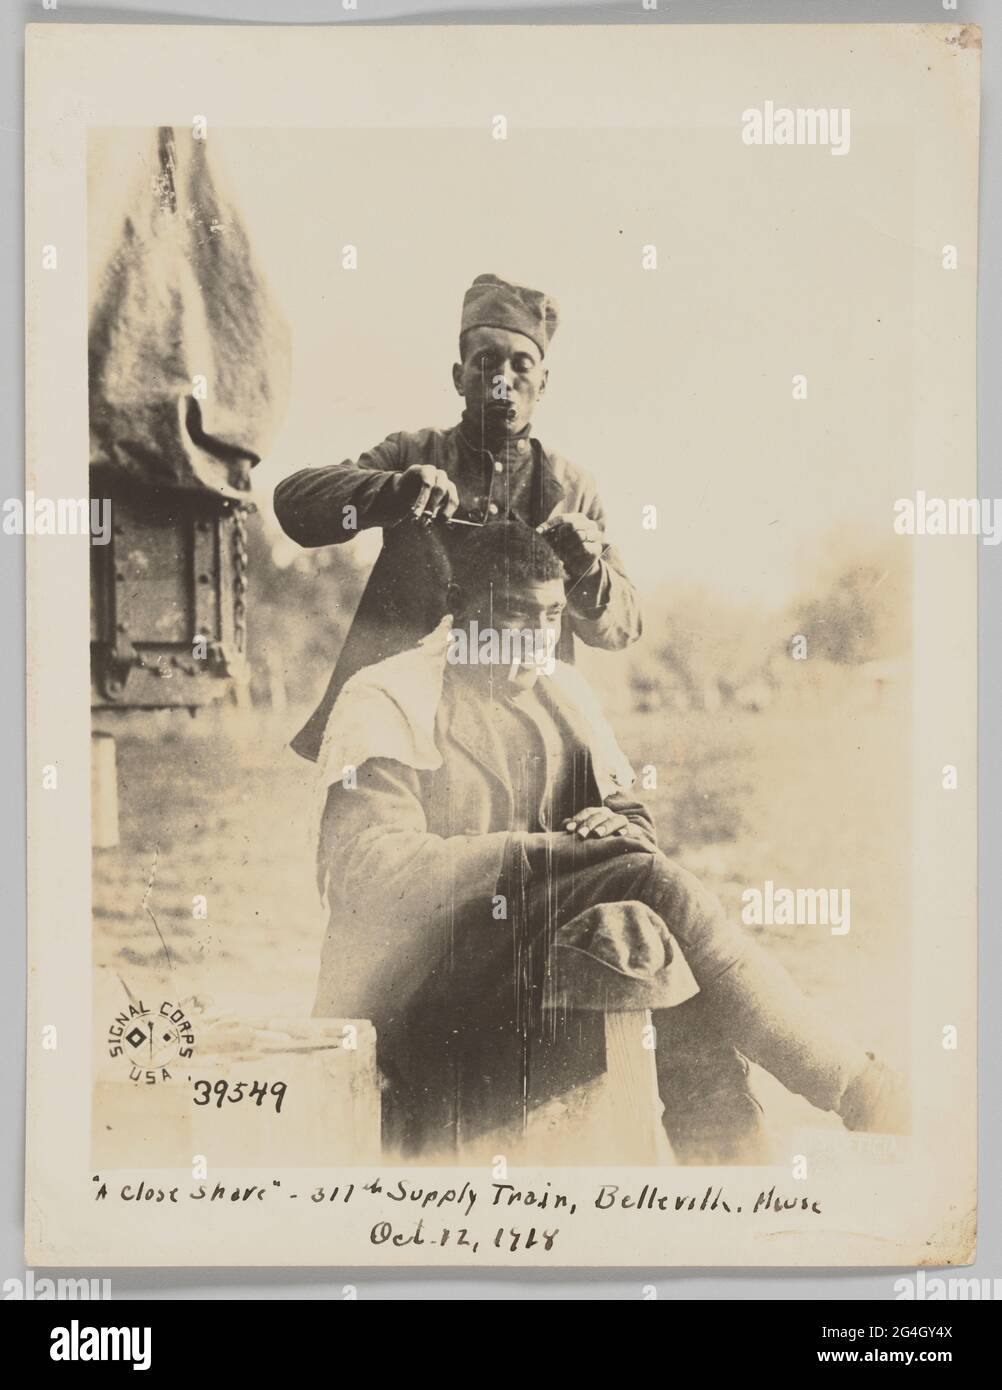 African-American soldiers serving in France during the First World War. One soldier is shaving another soldier's head. One soldier is seated with his right leg crossed over his left leg. His hands are resting on his thigh and he has a cigarette in his mouth. His hat is hanging on a wooden post to his right. The other soldier stands behind. His hands are raised and he is holding the razor blade in this right hand. He is wearing his uniform and hat and is pursing his lips. The Signal Corps USA logo is in the bottom left corner of photograph. Stock Photo